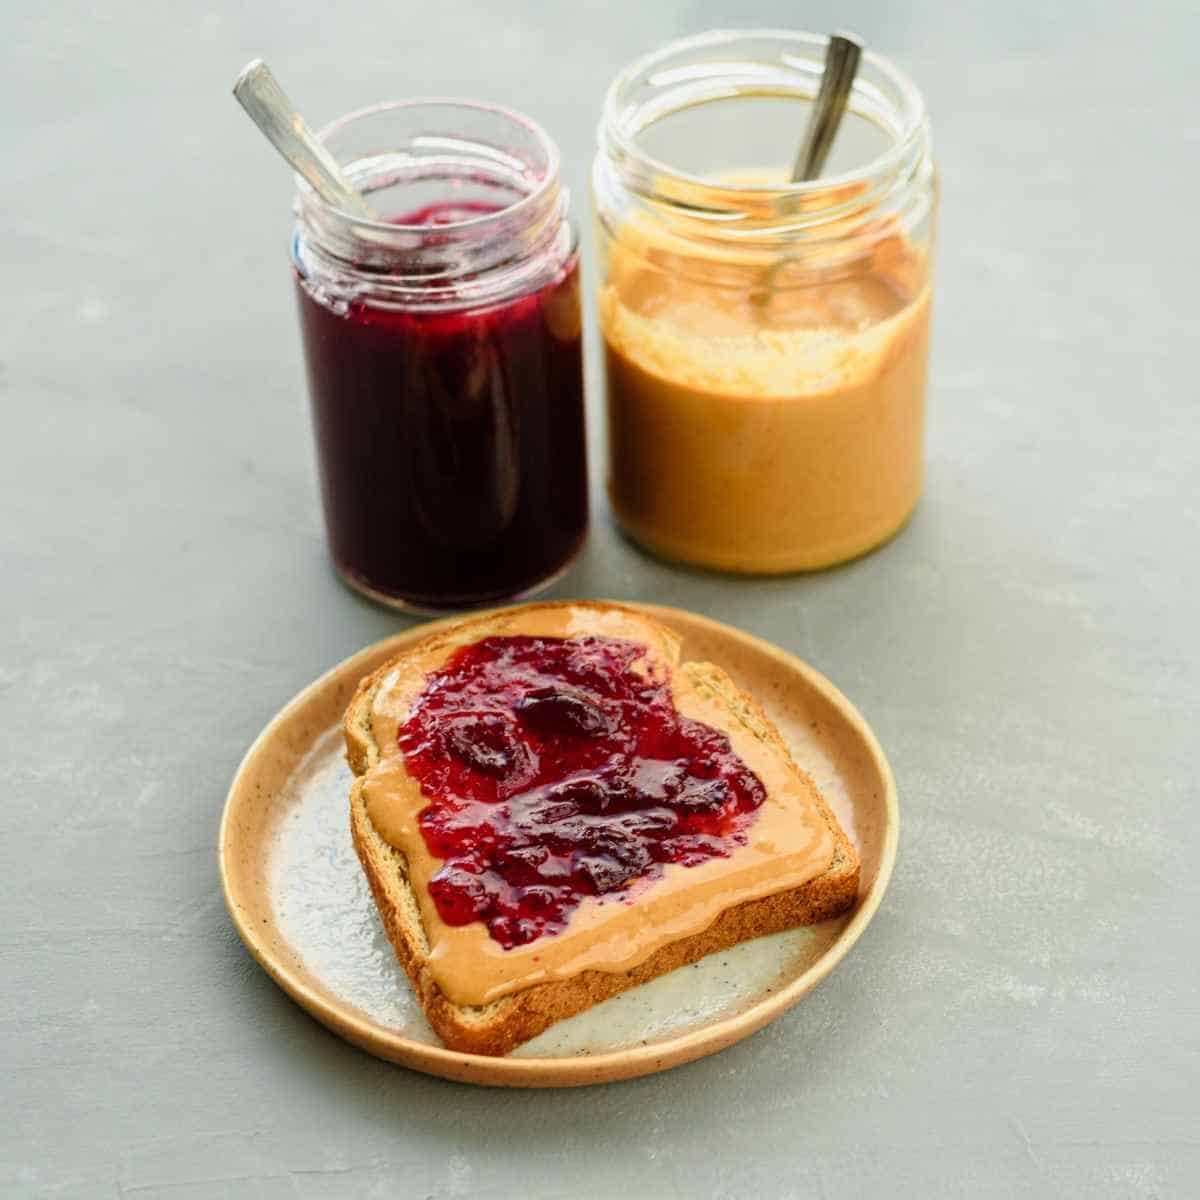 A jar of peanut butter and jelly with separate utensils to prevent cross-contact.